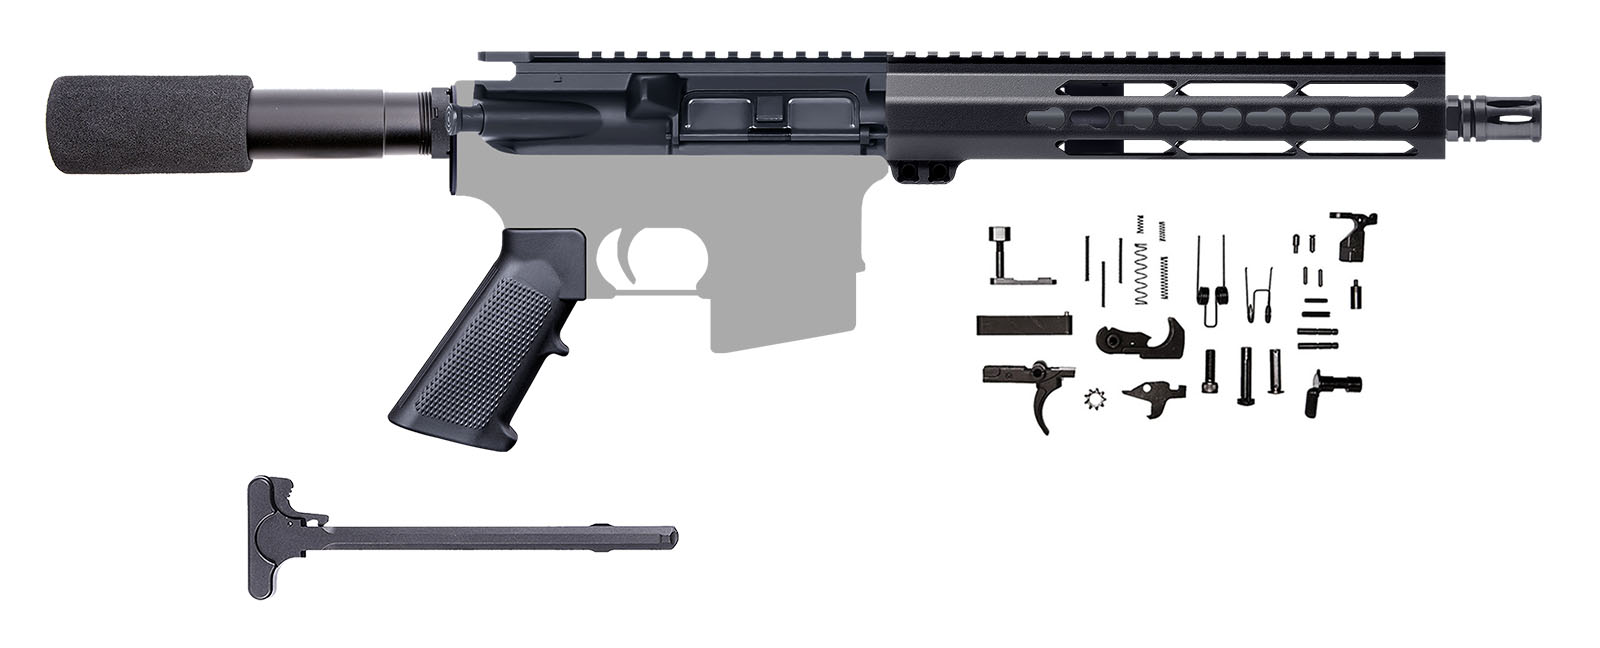 AR-15 Blemished Pistol Kit / 300AAC / 1:8 / 10″ CBC KEYMOD AR-15 HANDGUARD / Pistol Buffer Tube / CHARGING HANDLE / AR-15 LOWER PARTS KIT - B-305-743 (DOES NOT INCLUDE BCG)